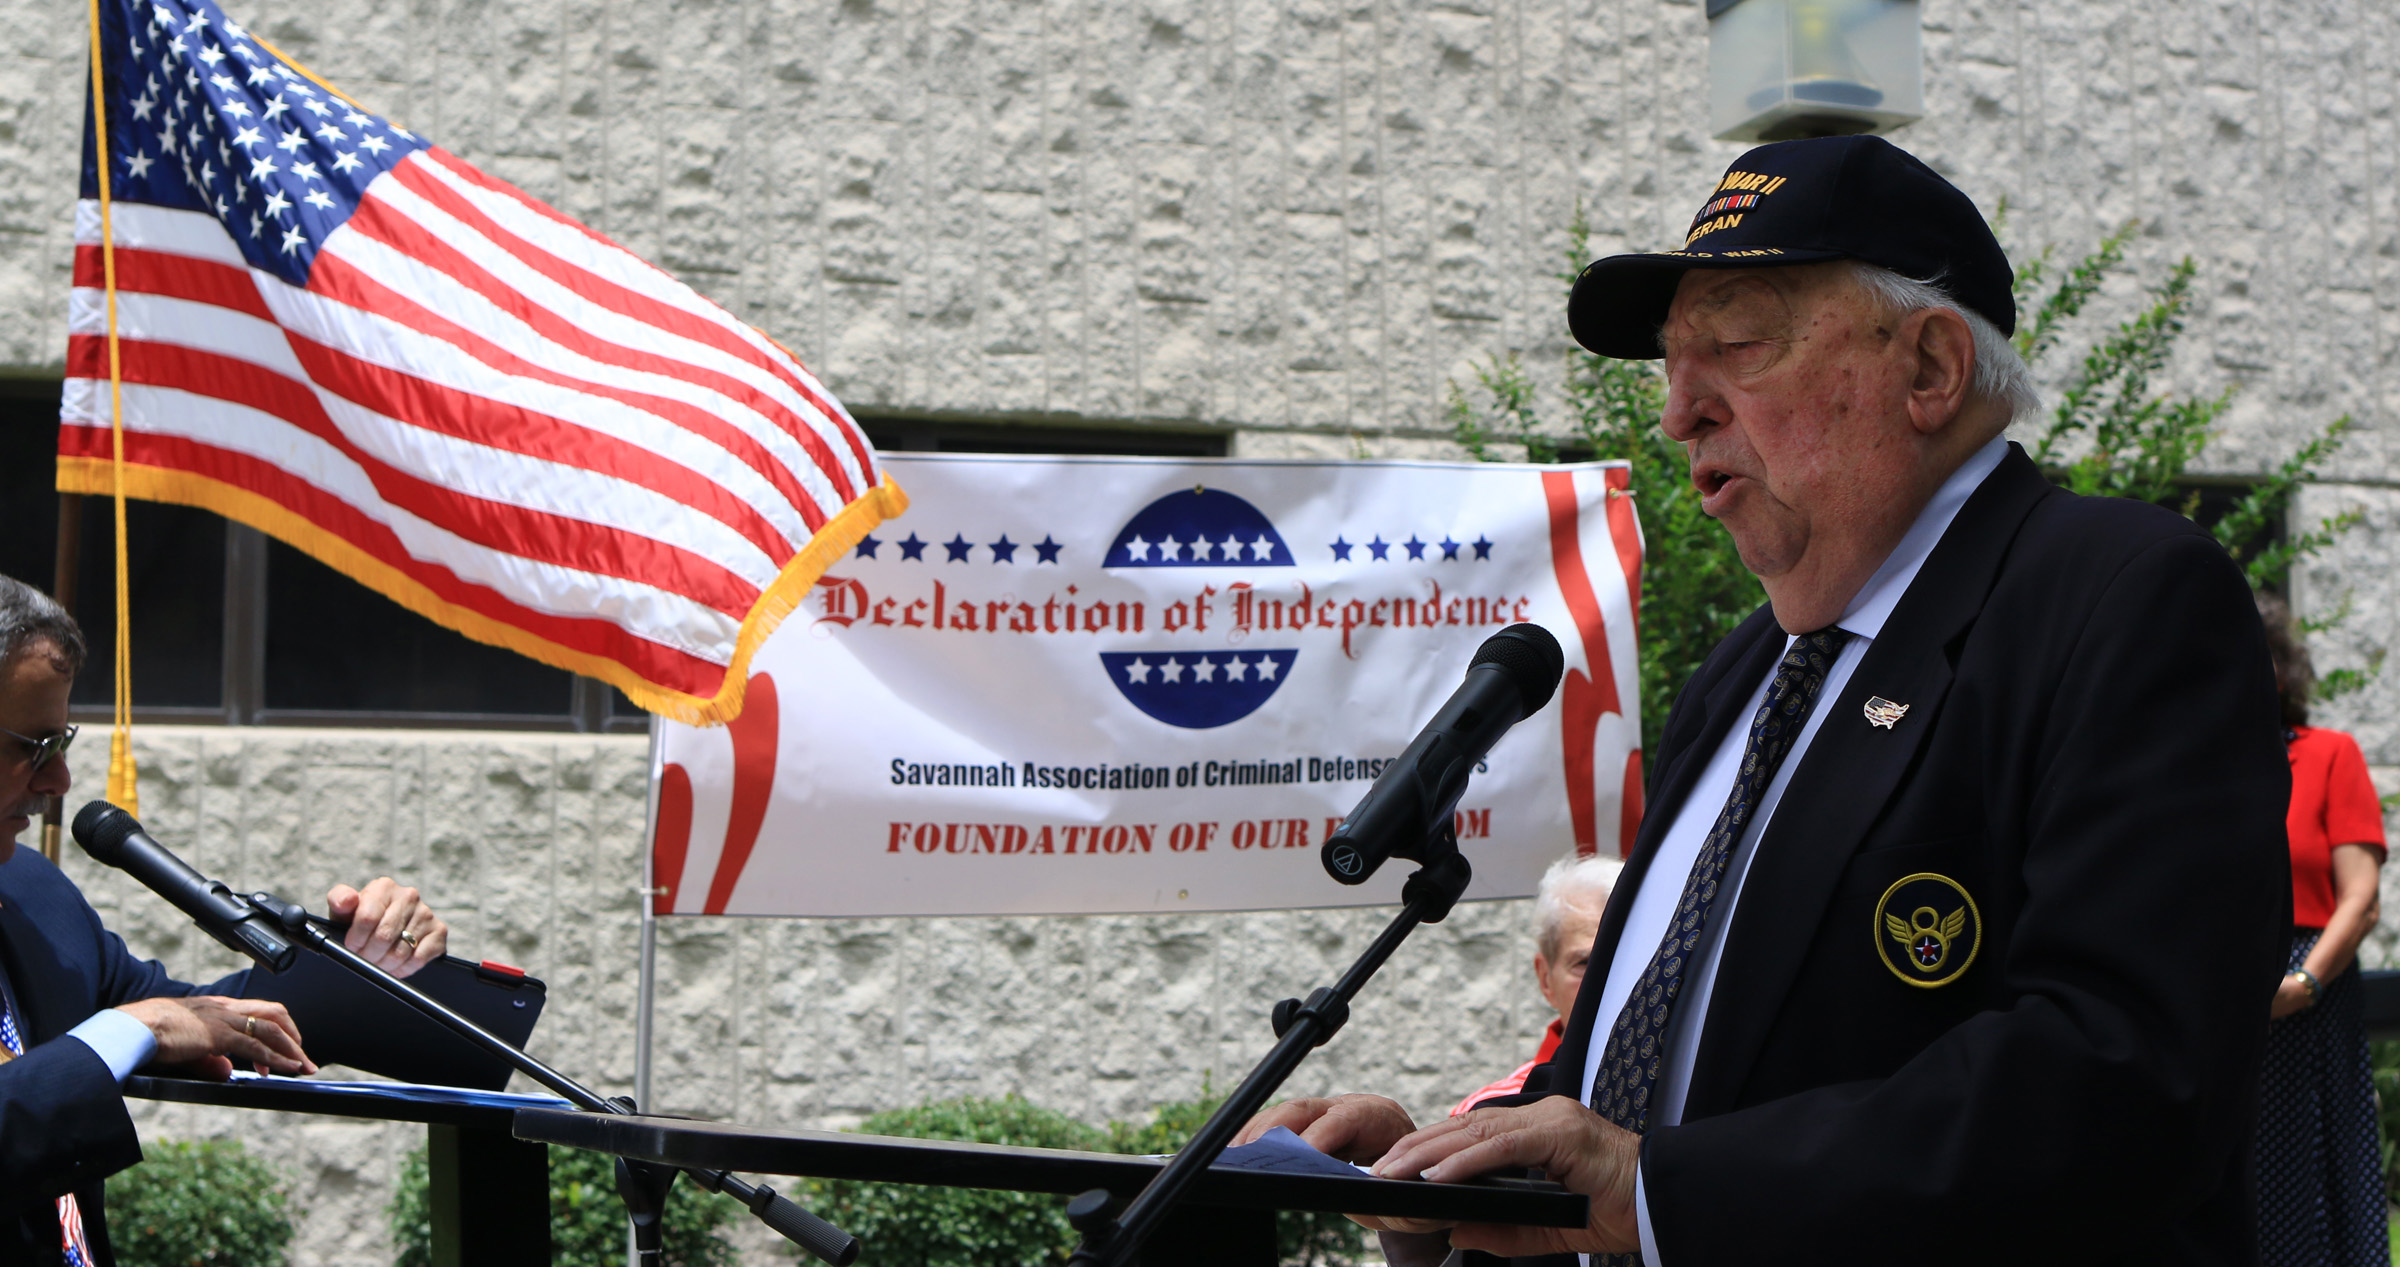  World War II veteran Paul Grassey, who flew B-24 bombers for the Mighty Eighth Air Force, sings "God Bless America" in July 2016 in front of the Chatham County Courthouse after local community leaders and elected officials read the Declaration of In